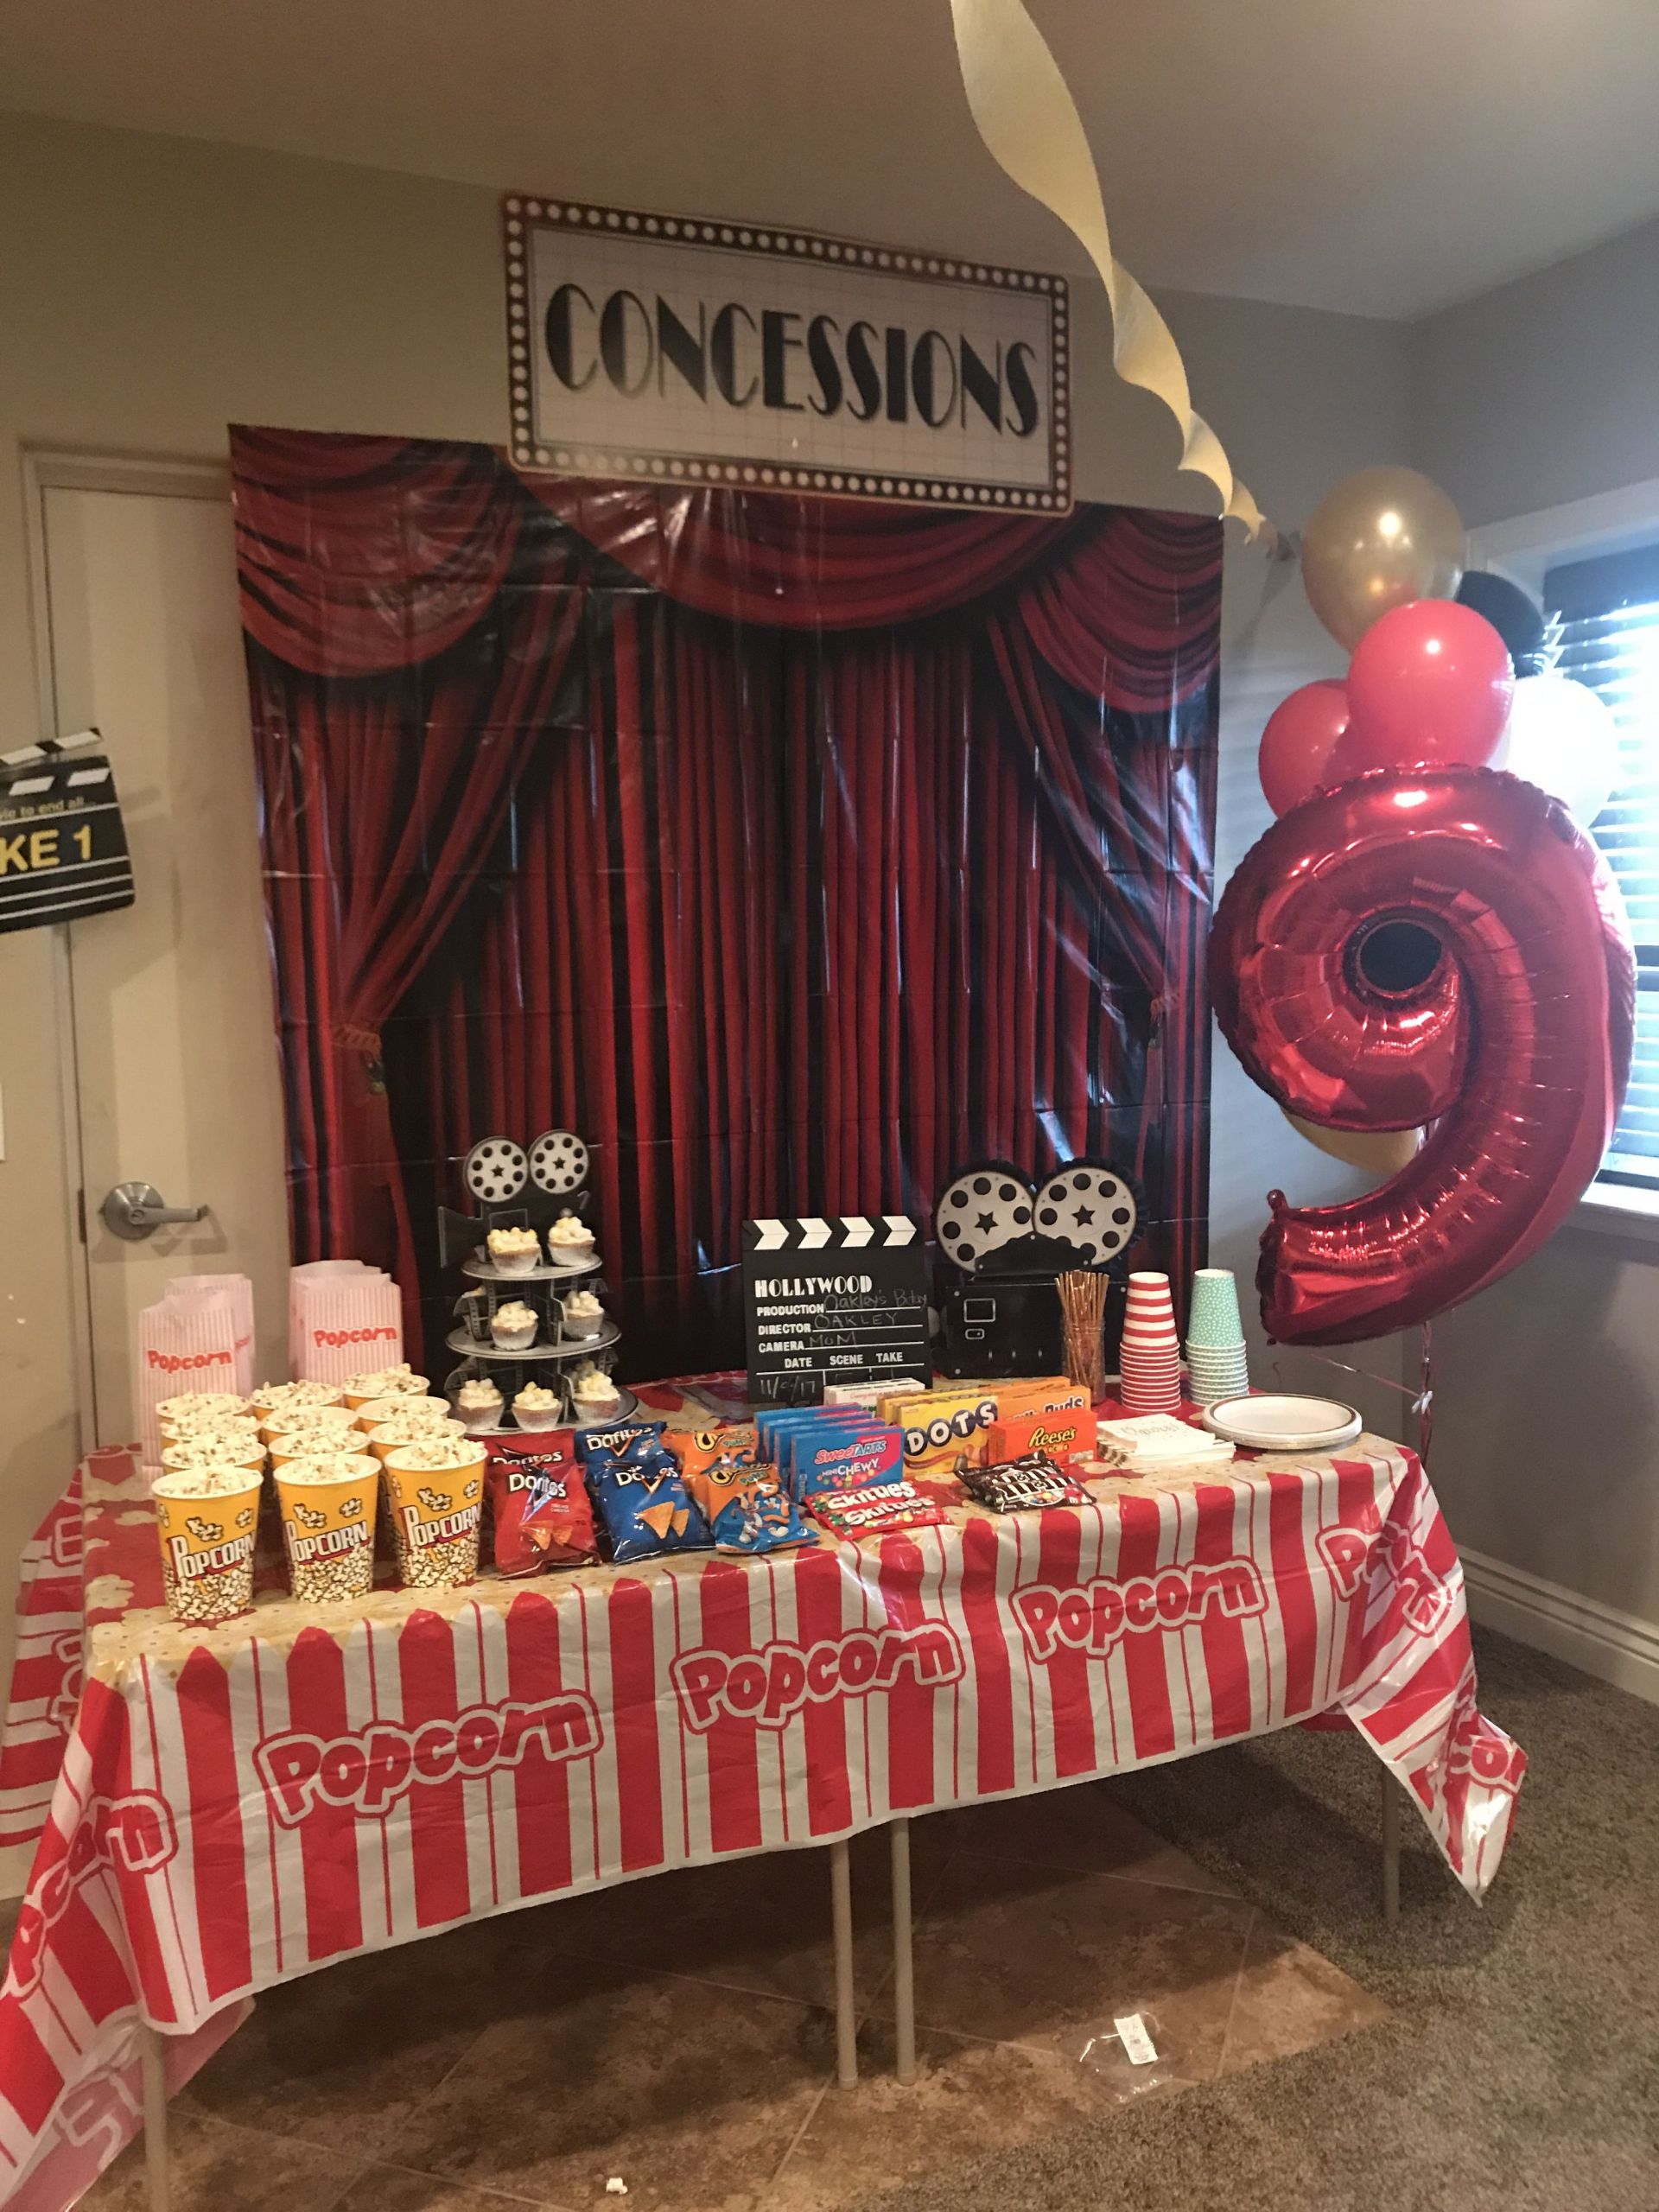 Movie Theater Birthday Party Ideas
 Oakley s home theater party